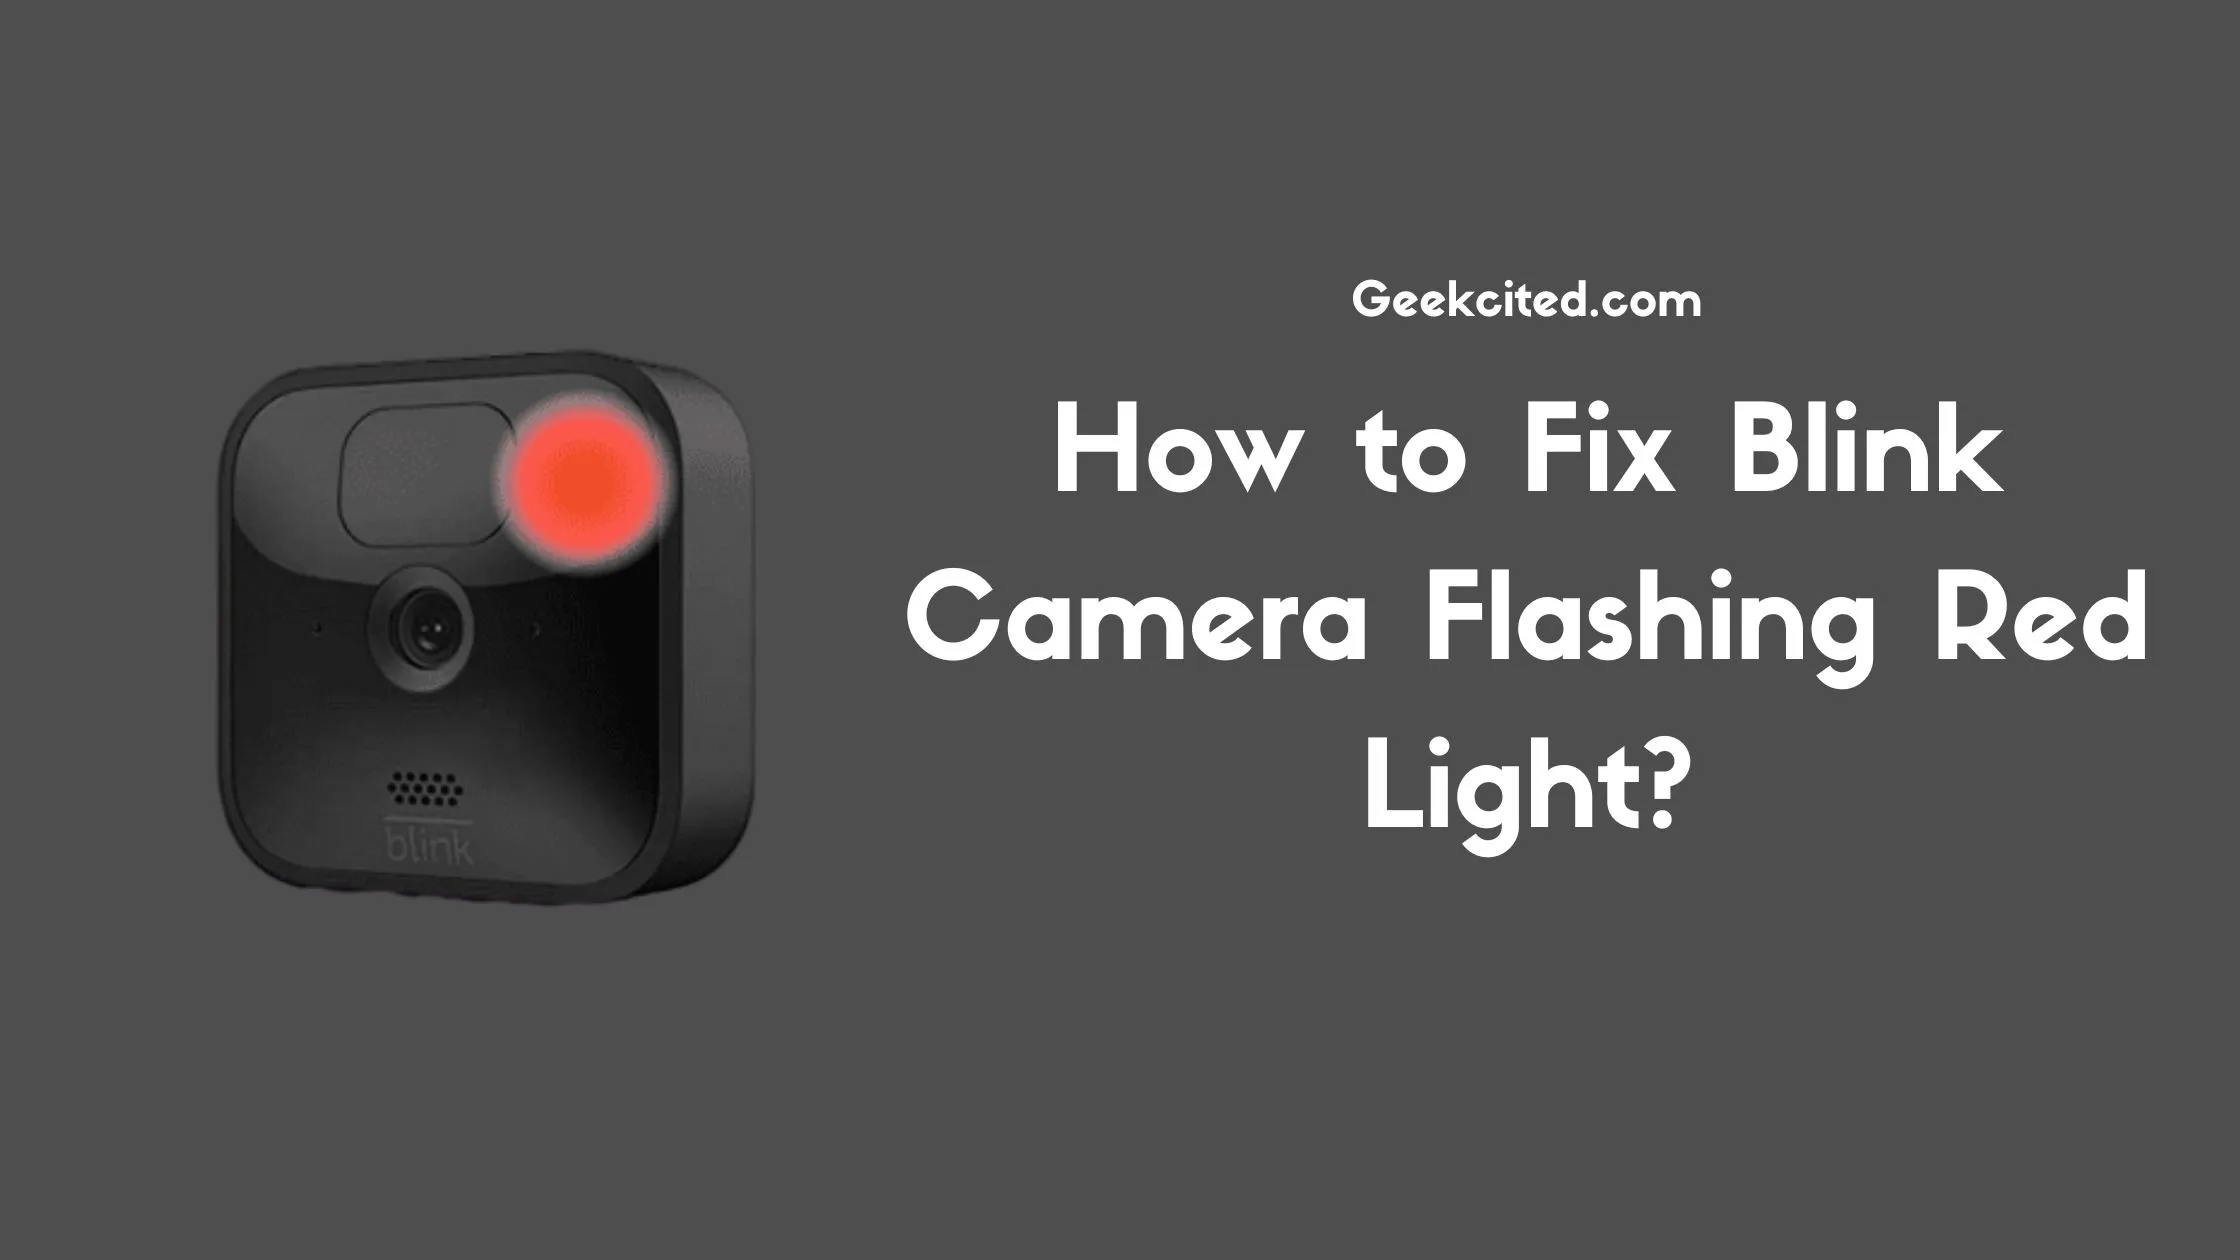 How to Fix Blink Camera Flashing Red Light